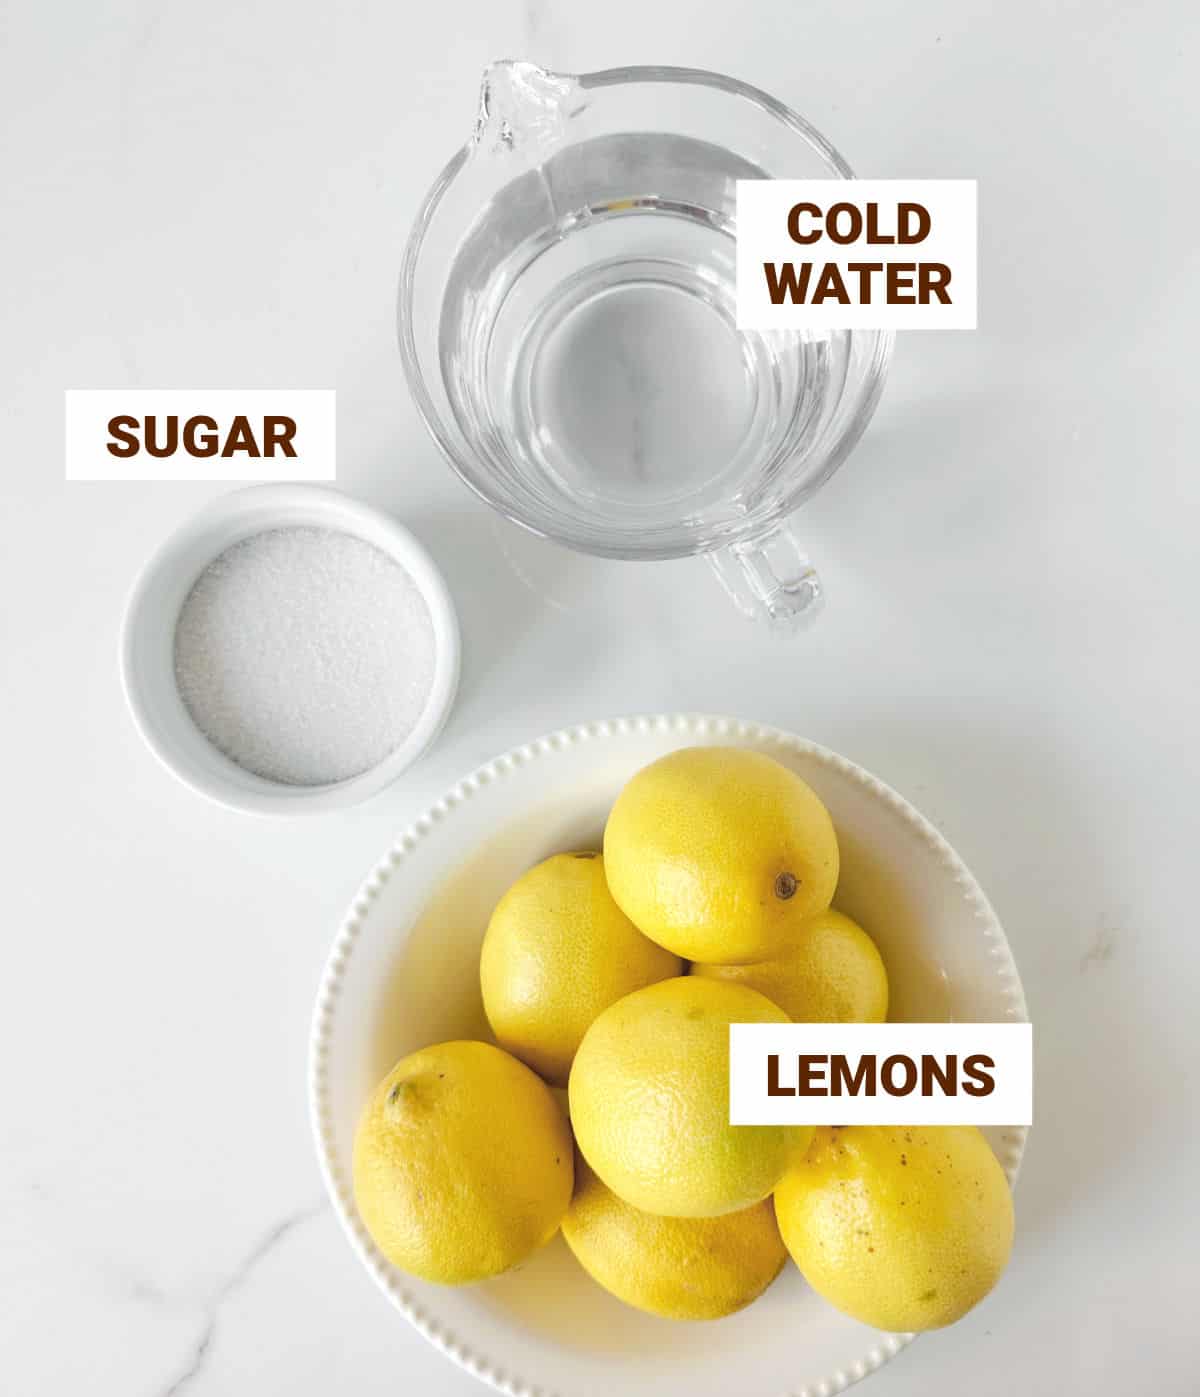 White marble surface with ingredients for lemonade including pitcher of water, whole lemons, and sugar in a white bowl.